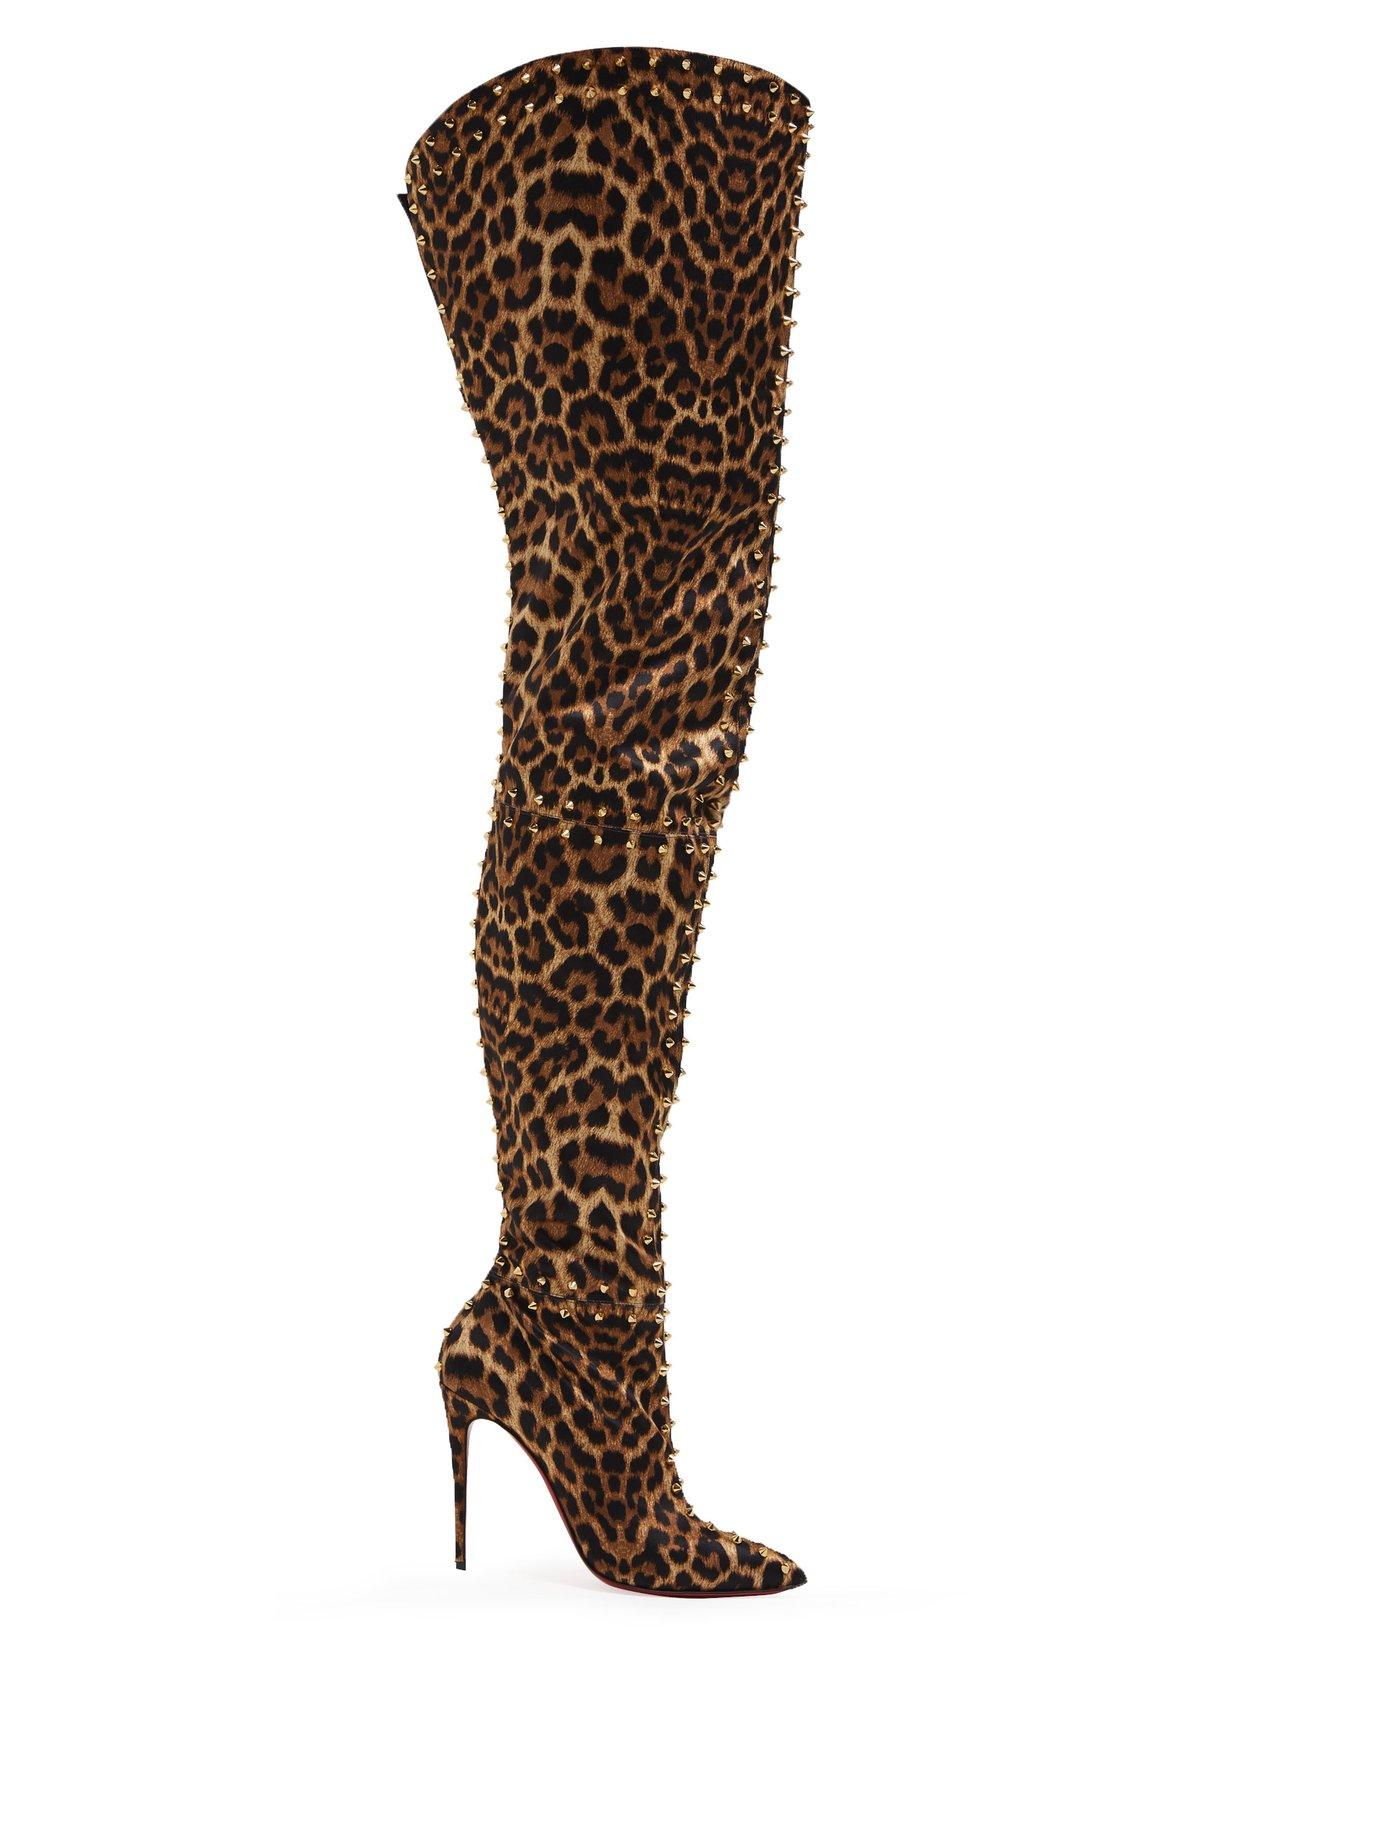 Christian Louboutin Metrolisse 100 Leopard Print Over The Knee Boots in Brown Lyst